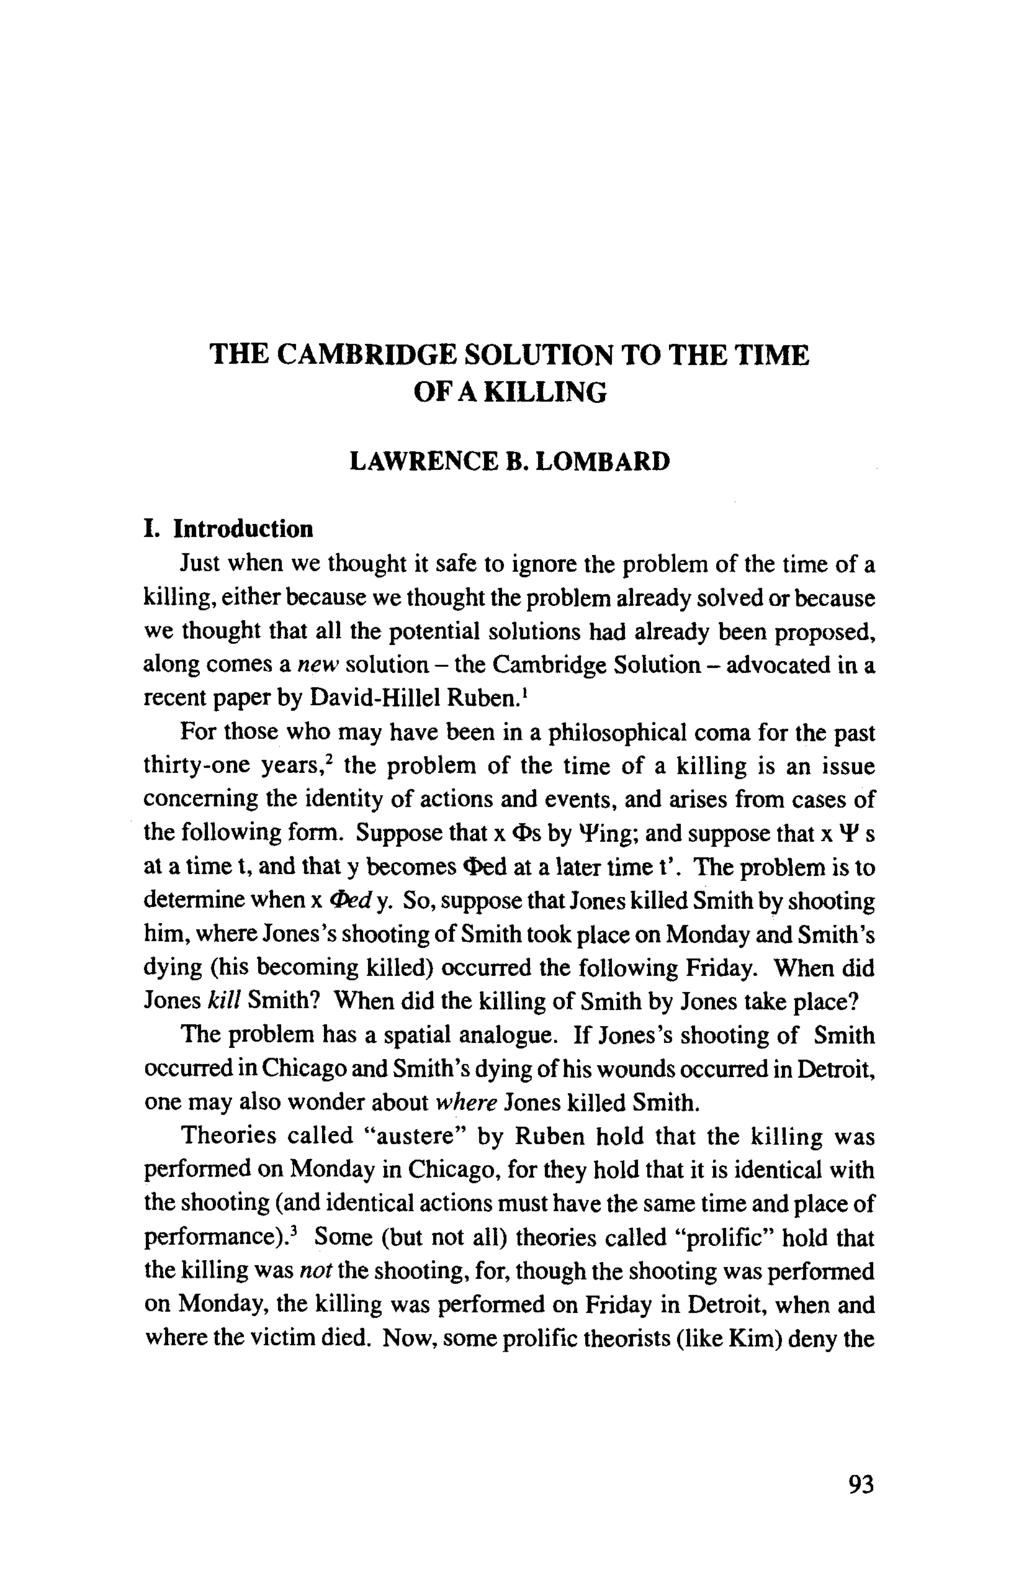 THE CAMBRIDGE SOLUTION TO THE TIME OF A KILLING LAWRENCE B. LOMBARD I.